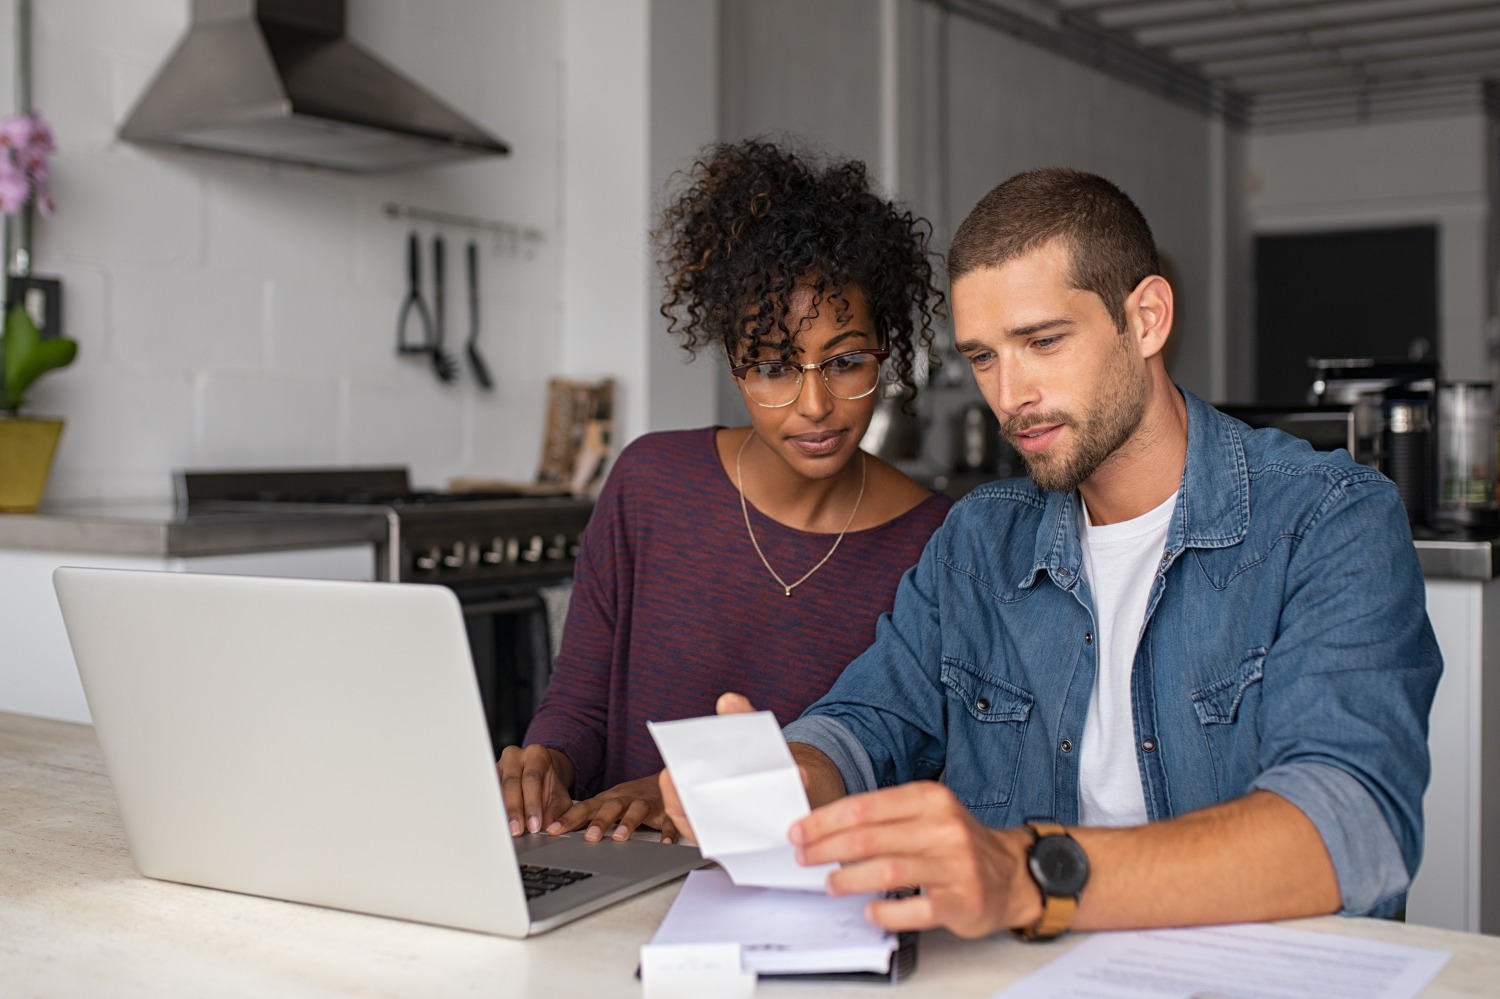 Man and woman managing money together at laptop